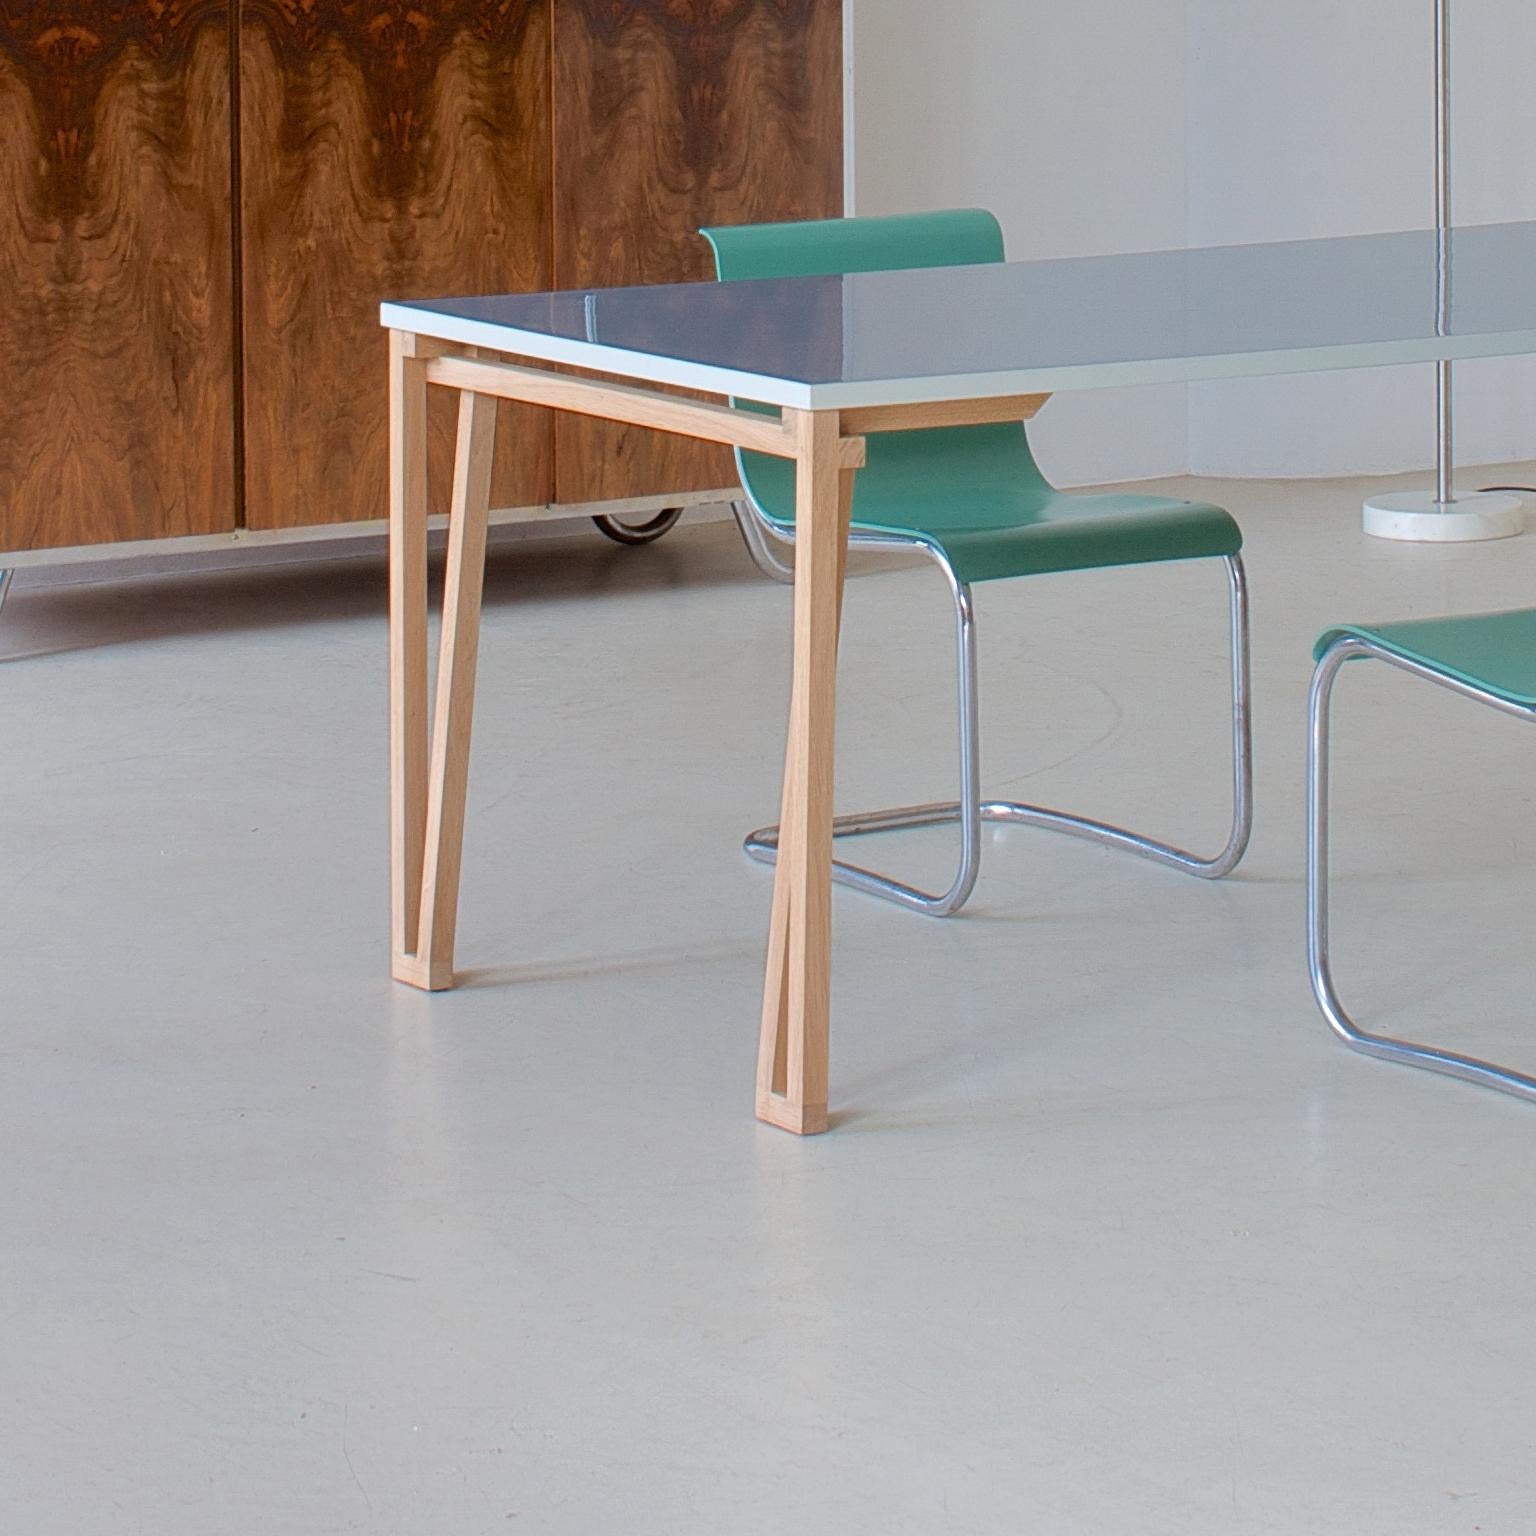 German Modern Contemporary Handcrafted Wooden Table, Customisable, by GMD Berlin, 2014 For Sale